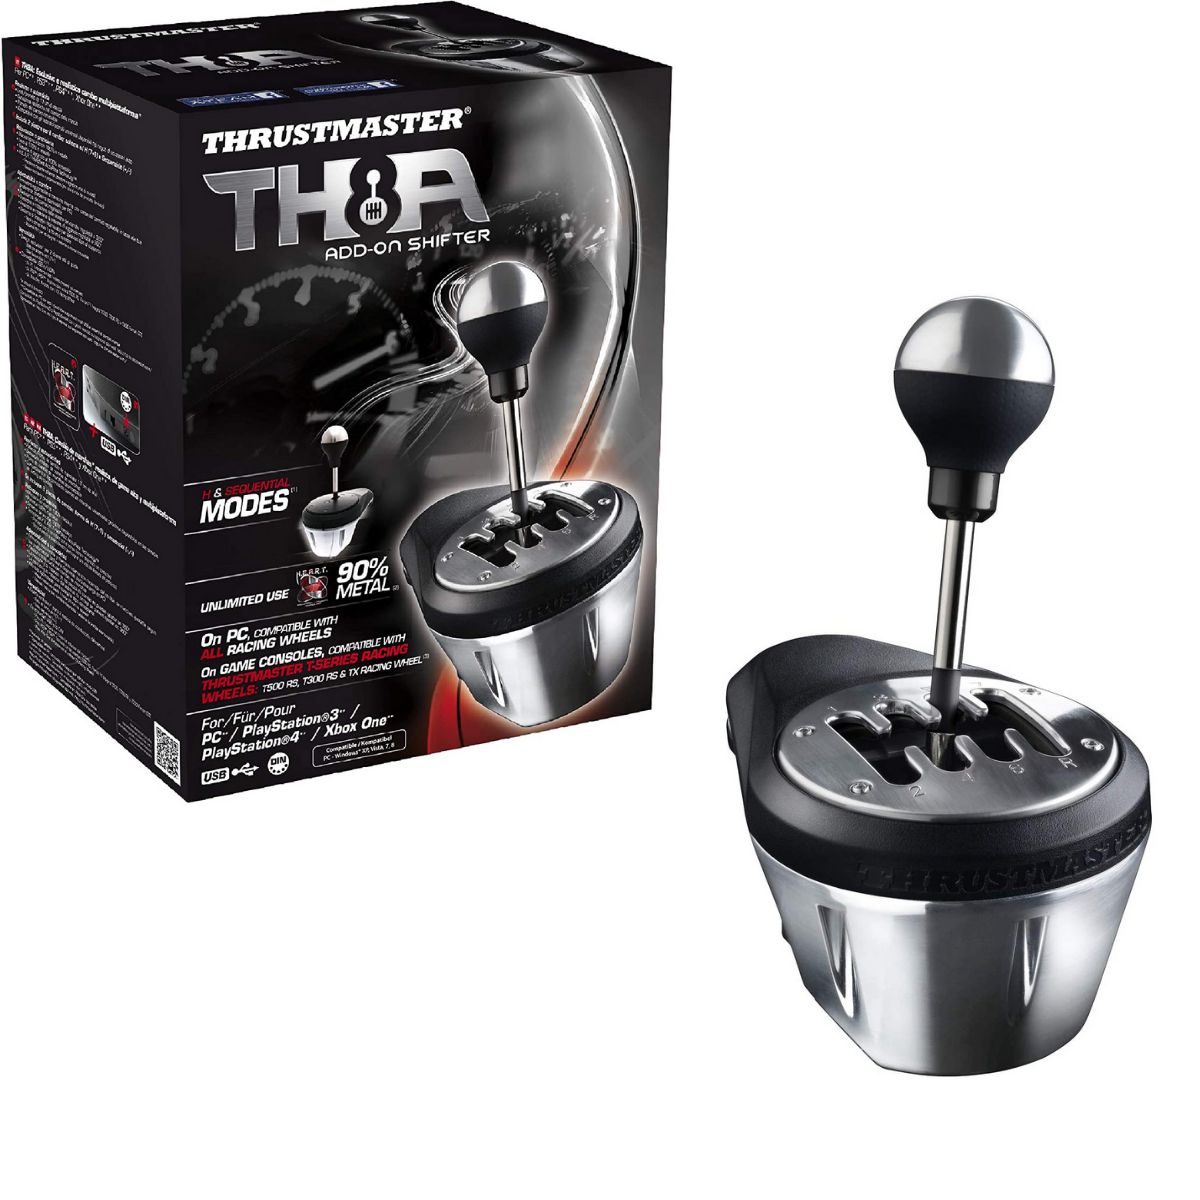 Thrustmaster Shifter TH8A Add-On Câmbio Marchas - Game Games - Loja de  Games Online